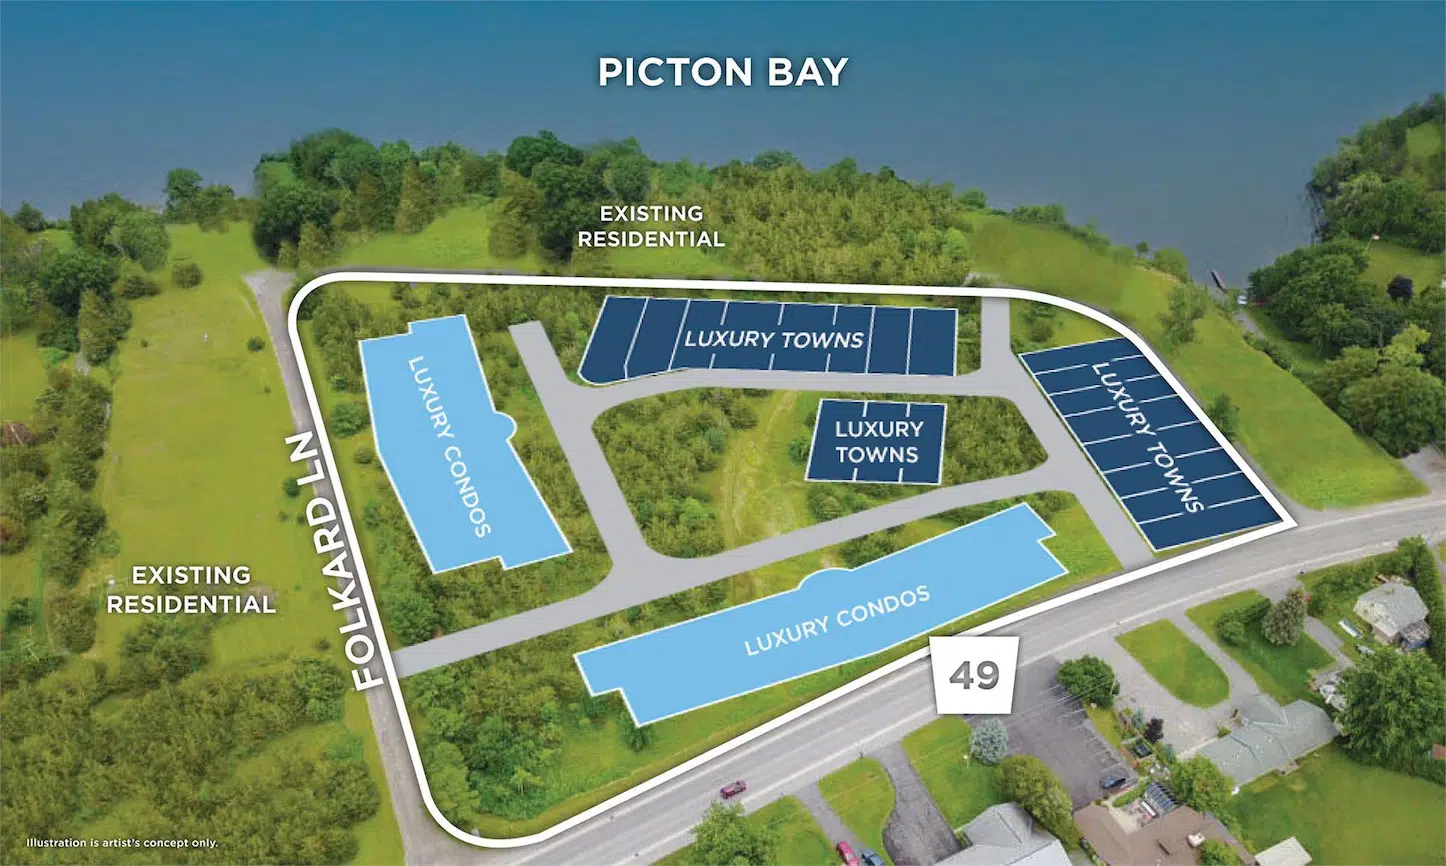 Information meeting on potential residential development in Picton